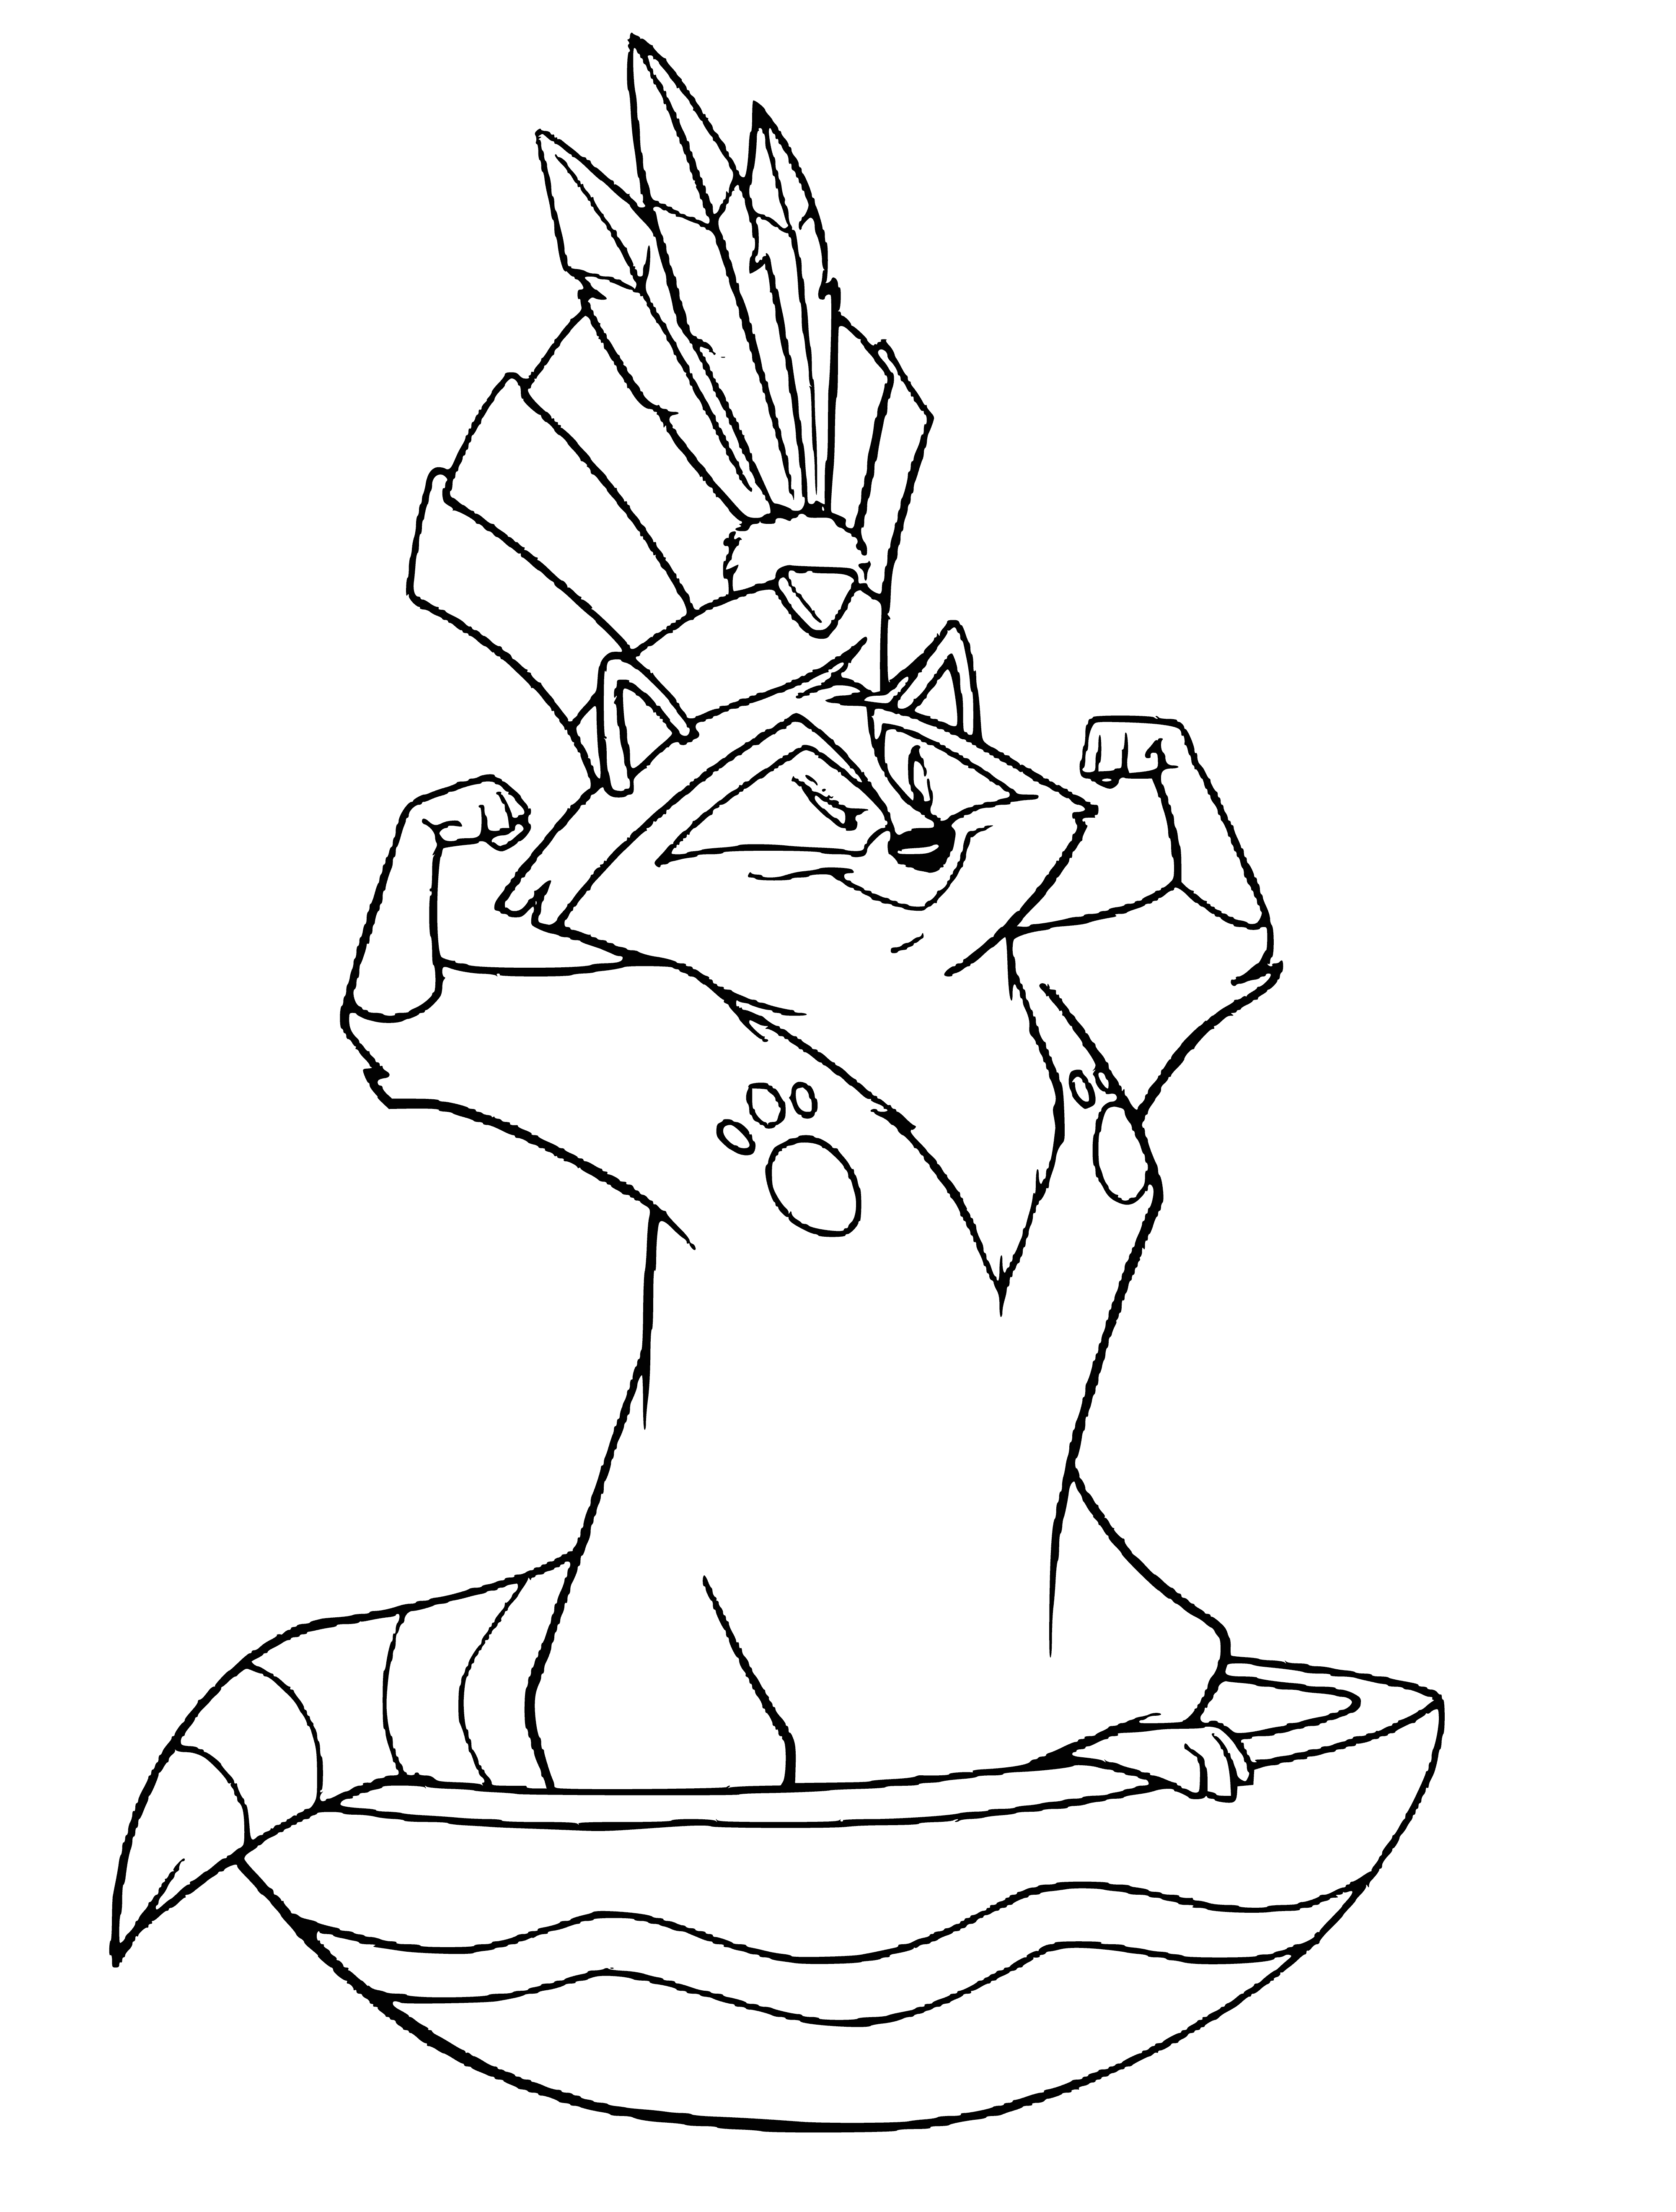 coloring page: Miko is Pocahontas's loyal best friend, with a brave spirit & funny personality. He always stands up for what he believes in and brings joy to Pocahontas's life.